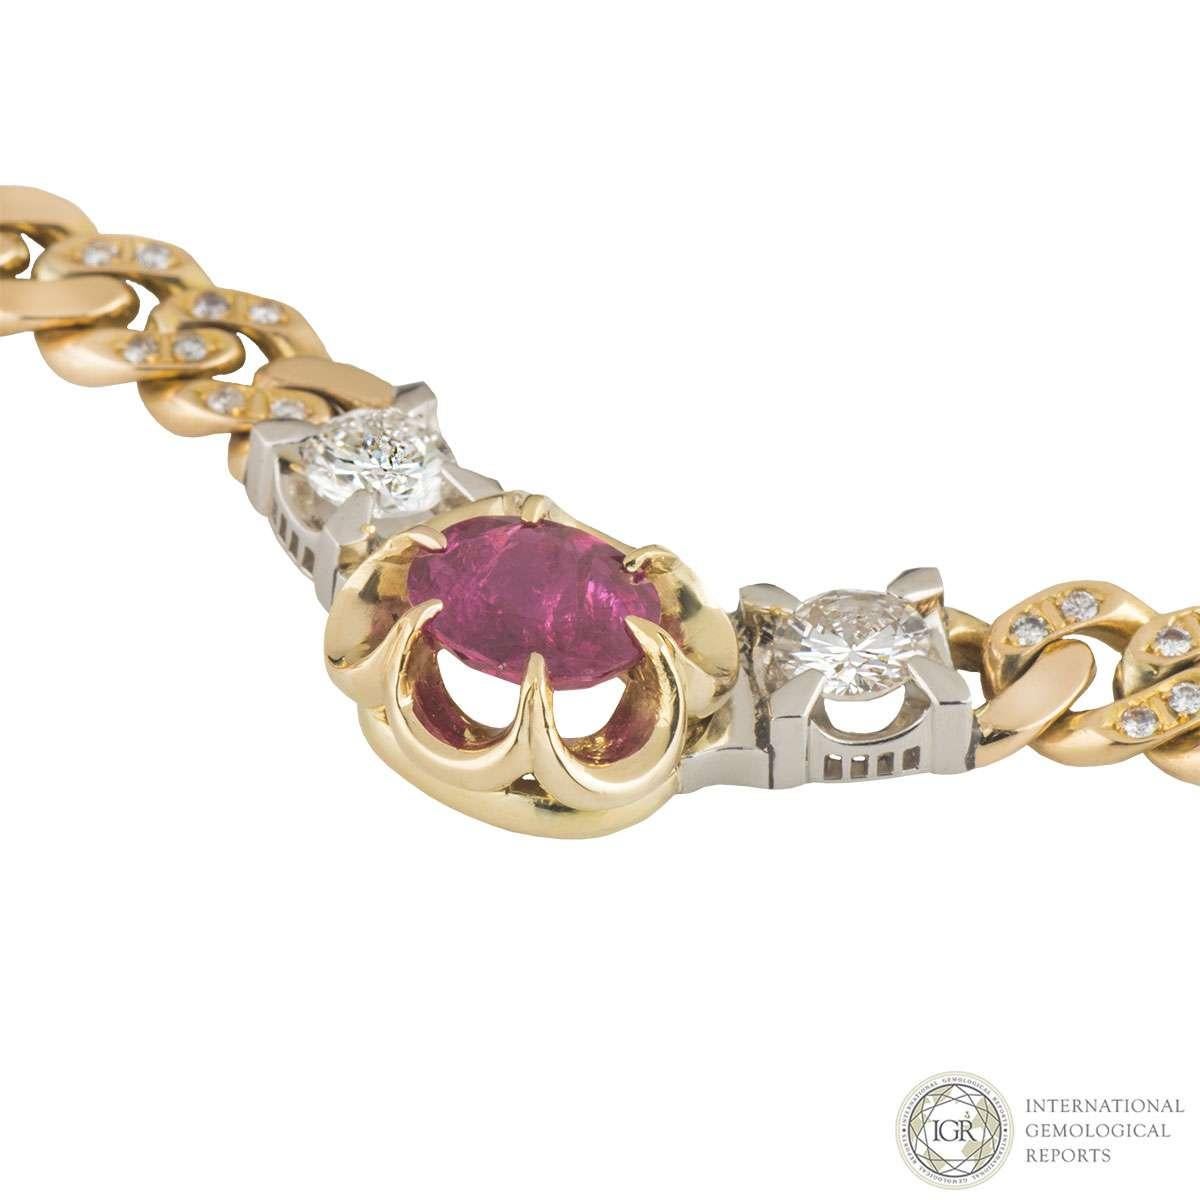 An 18k yellow gold ruby and diamond necklace. The necklace features an oval mixed cut natural ruby weighing approximately 2.40ct, displaying a bright medium pinkish red colour. Set to either side of the ruby there is a single round brilliant cut